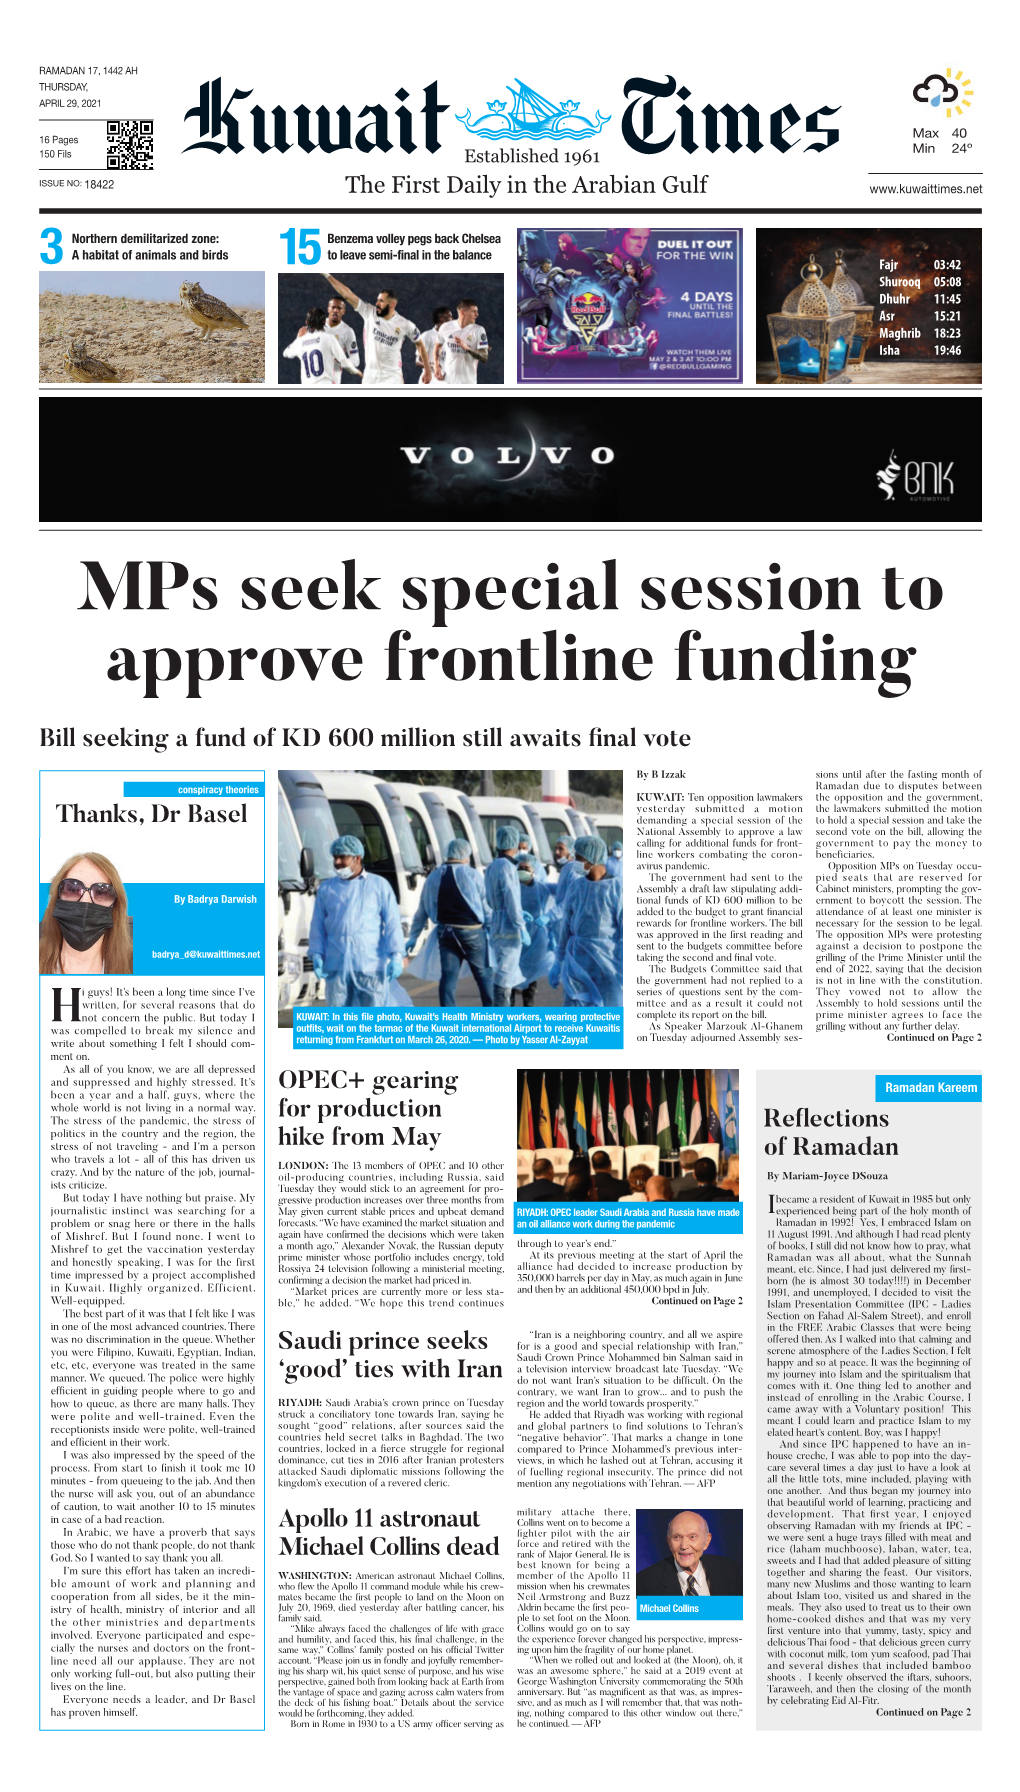 Mps Seek Special Session to Approve Frontline Funding